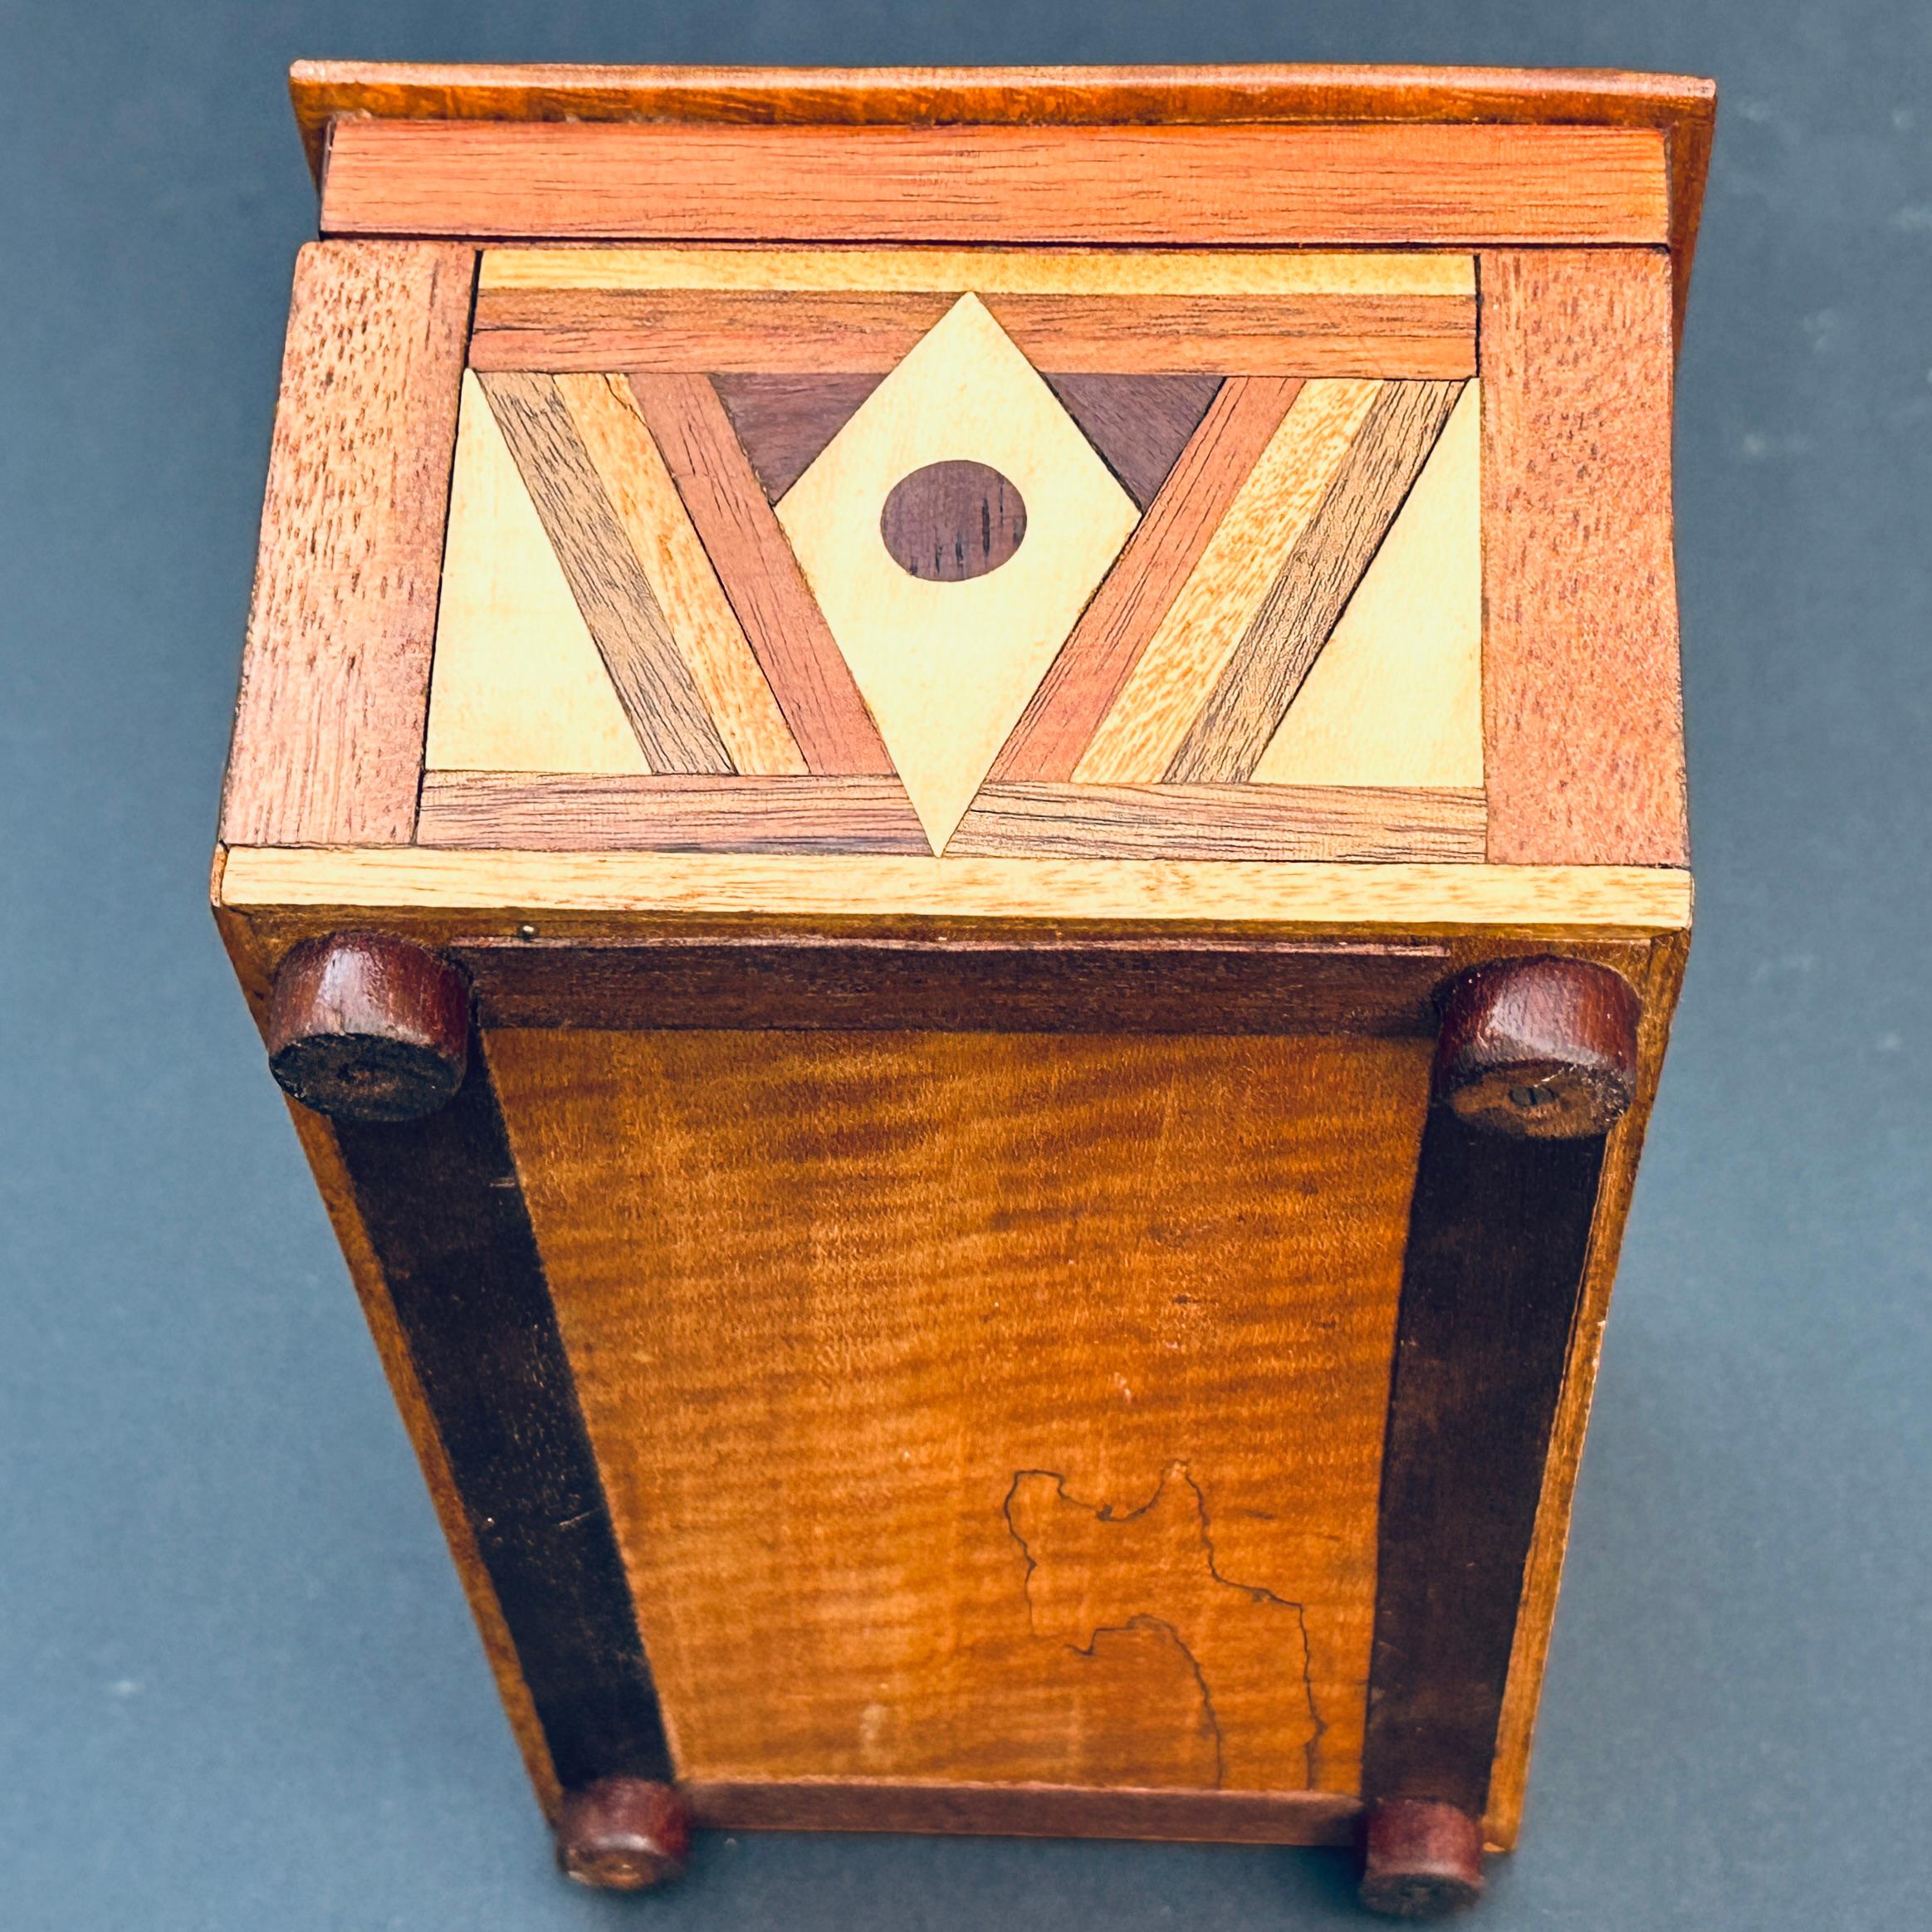 Folk Art Geometric Inlaid Wood Small Hinged Box In Good Condition For Sale In West Chester, PA